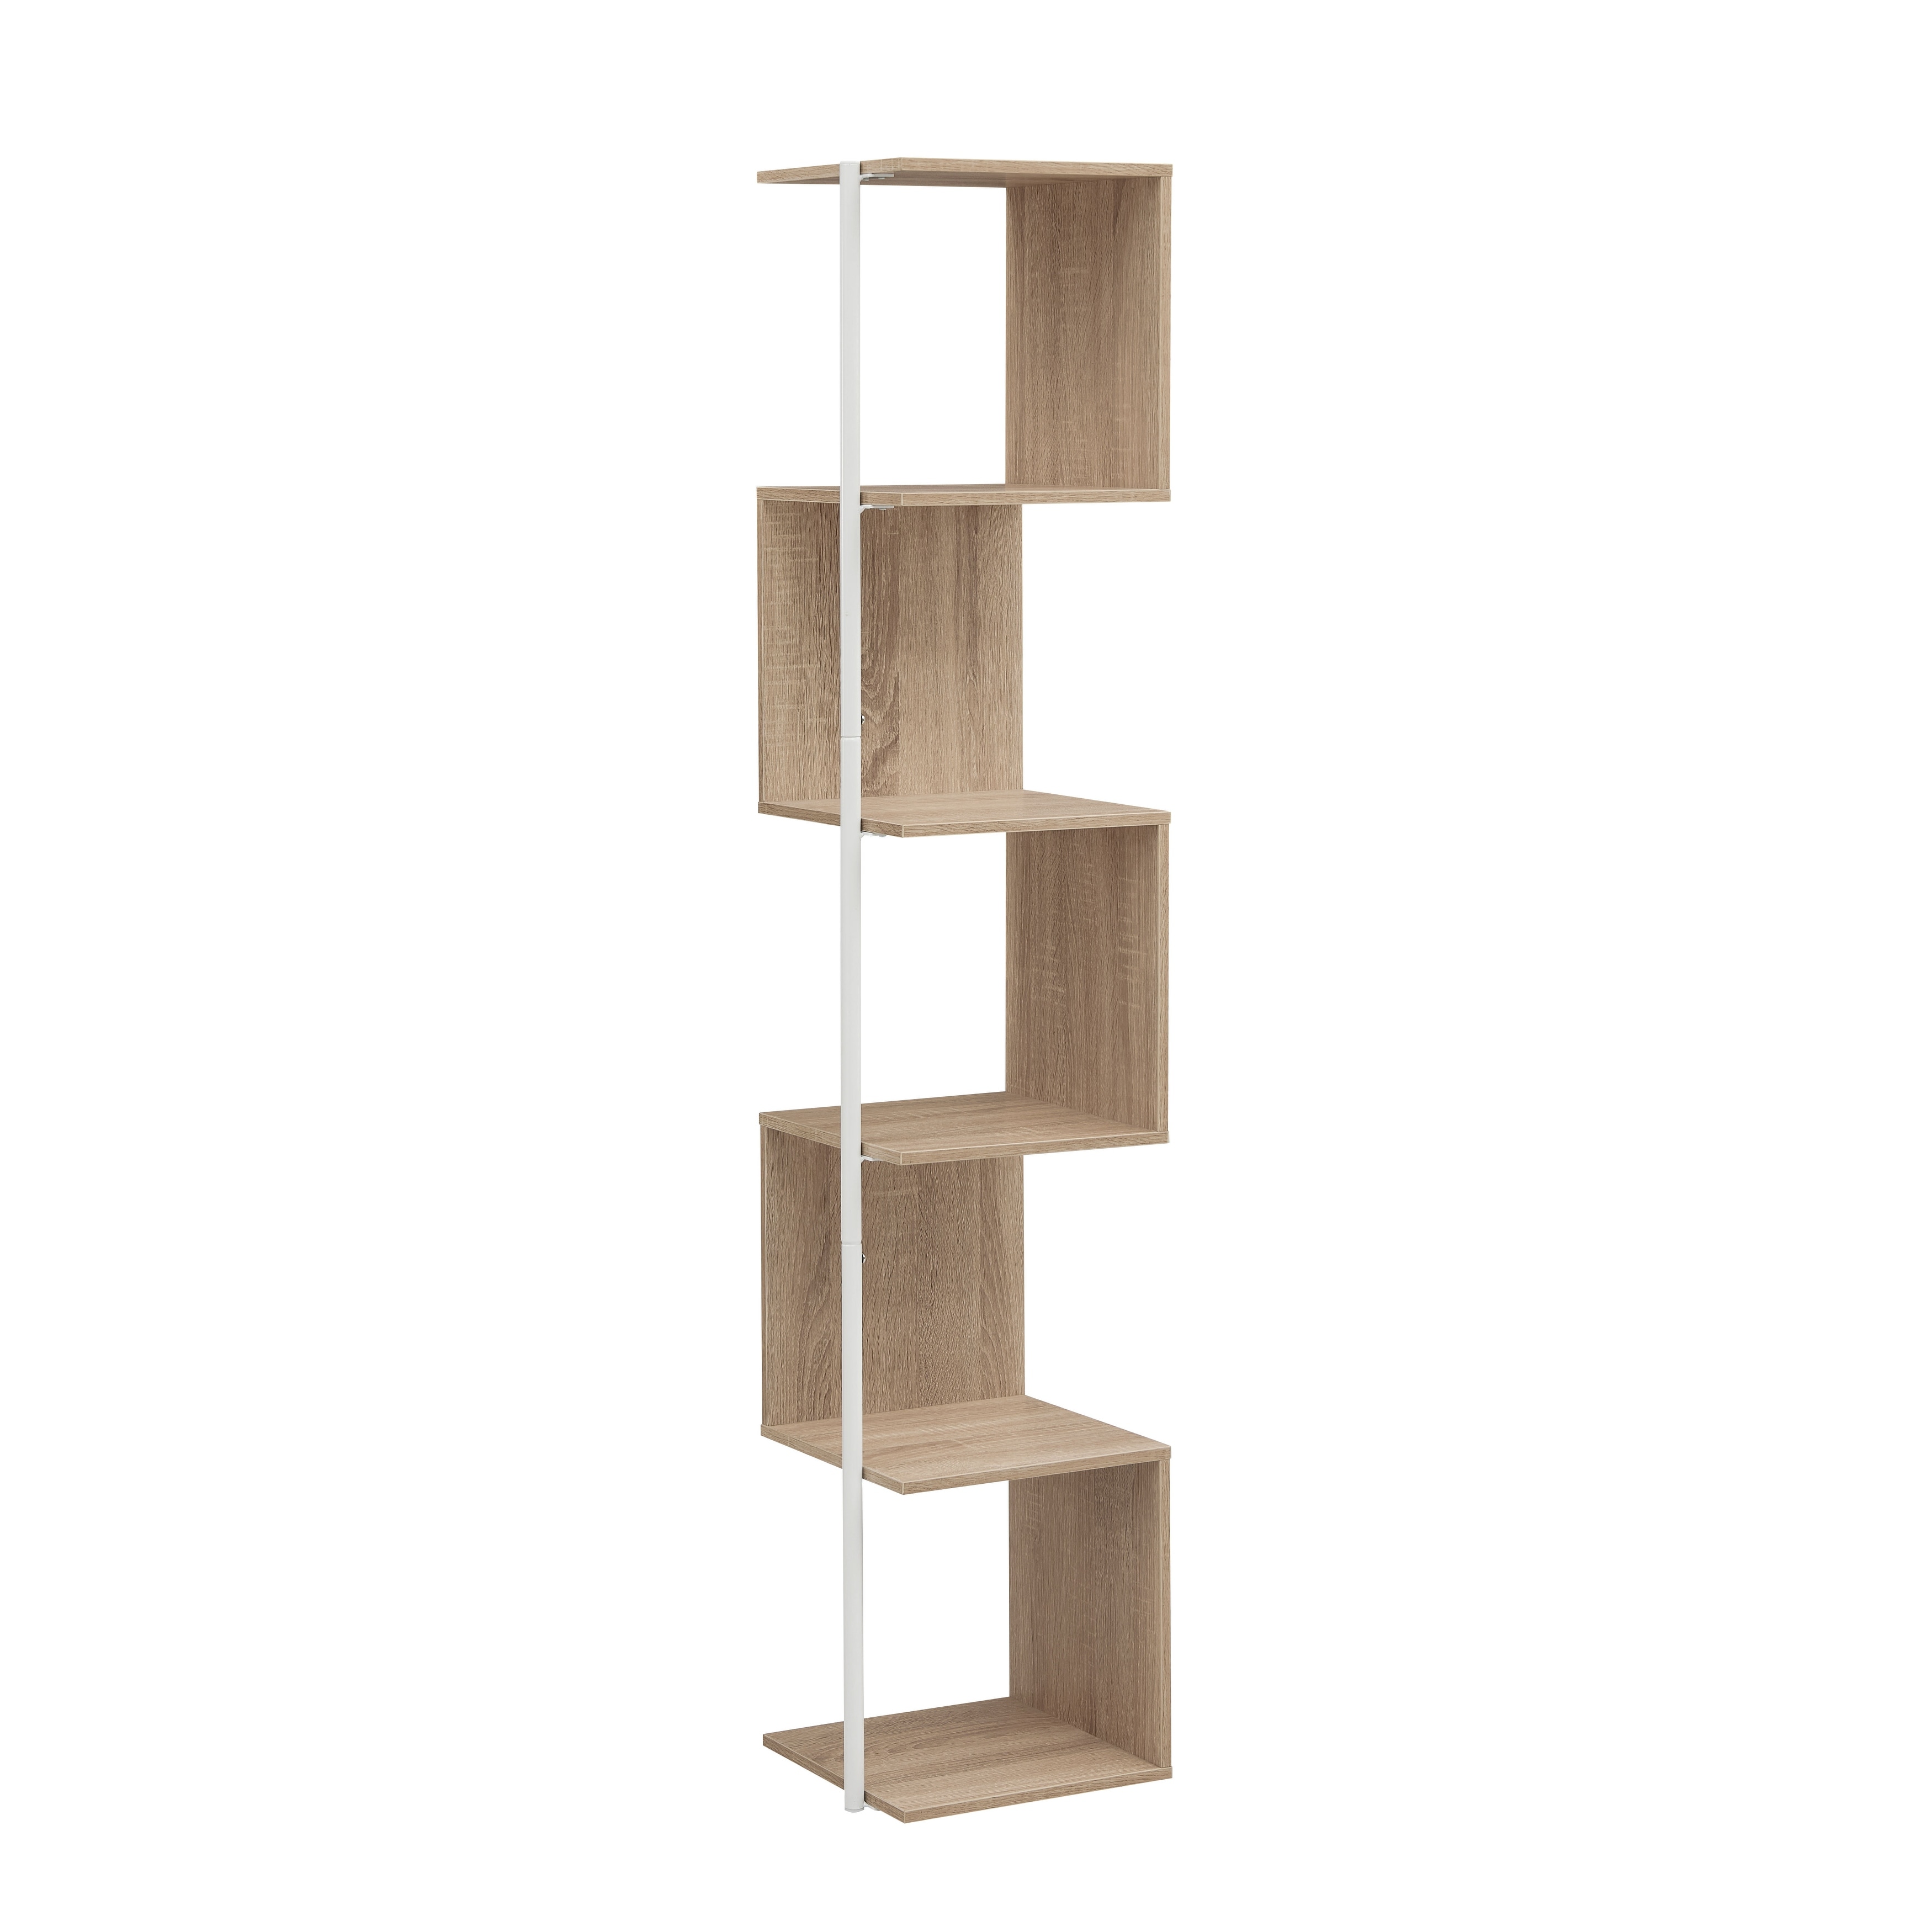 https://ak1.ostkcdn.com/images/products/is/images/direct/56dbc12e60efd0ecad28bff12239f05881ed3fe6/Linnea-Modern-5-Tier-Accent-Corner-Bookcase%2C-Freestanding-Display-Bookshelf-with-Cylinder-Metal-Leg-Post-by-Furniture-of-America.jpg